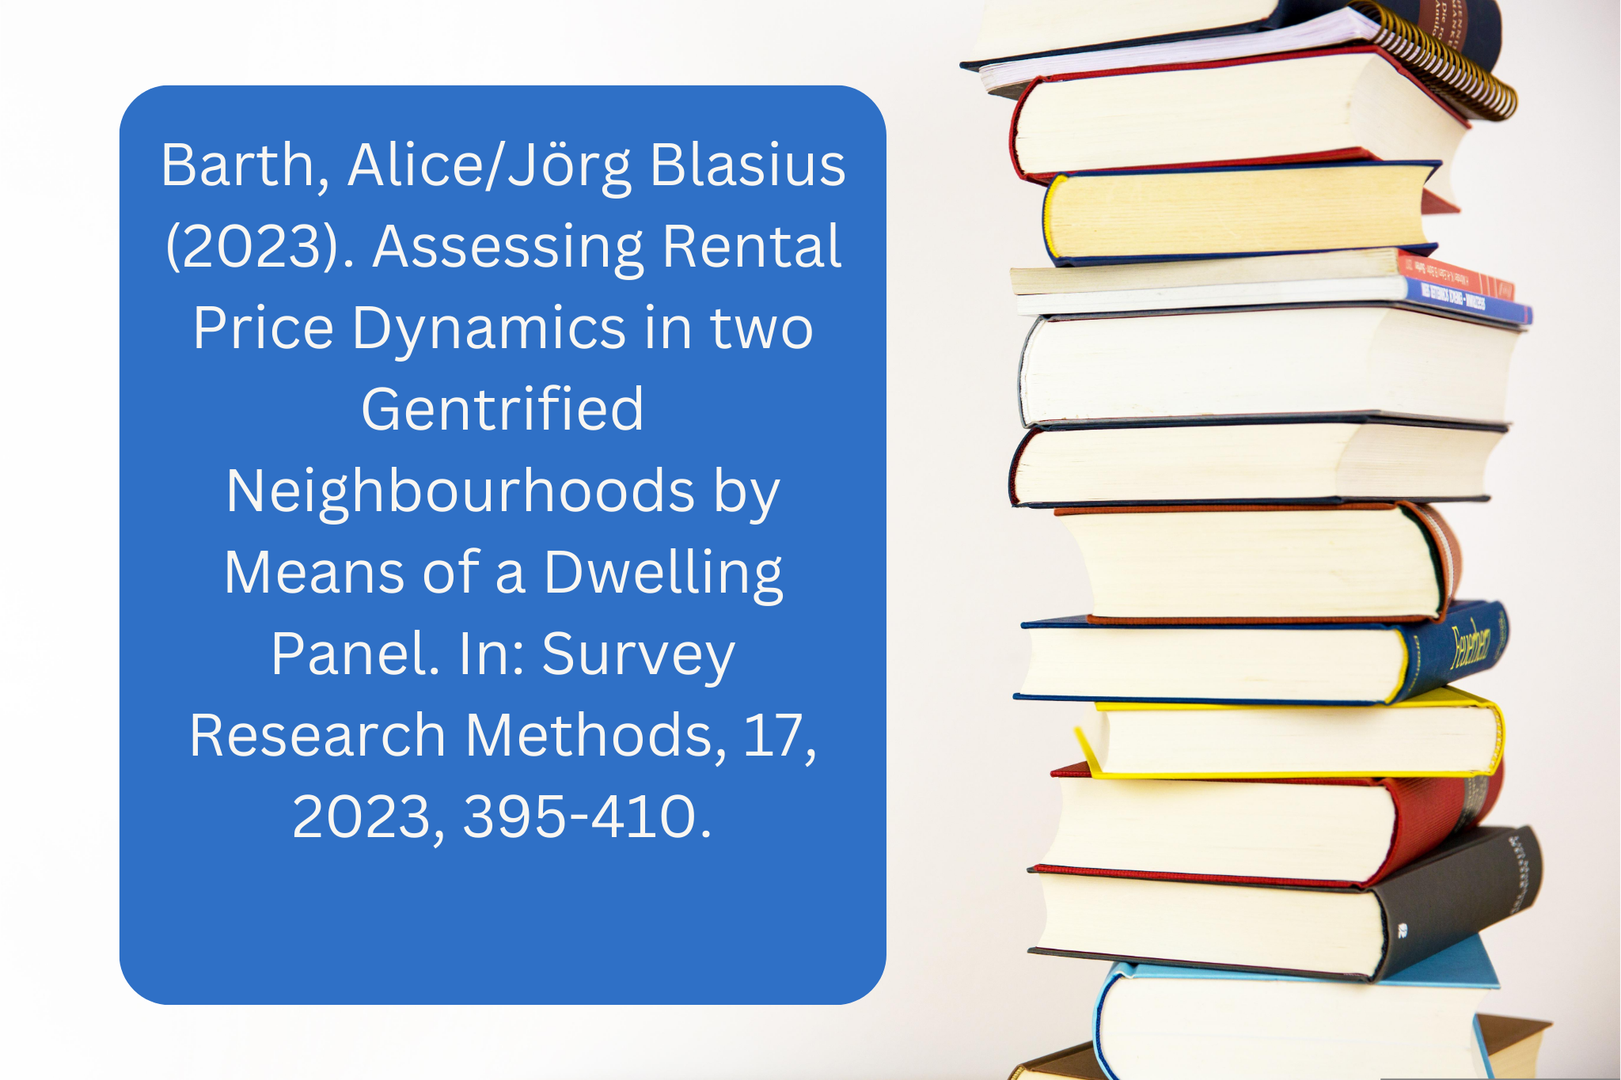 Barth, Alice/Jörg Blasius (2023). Assessing Rental Price Dynamics in two Gentrified Neighbourhoods by Means of a Dwelling Panel. In: Survey Research Methods, 17, 2023, 395-410.